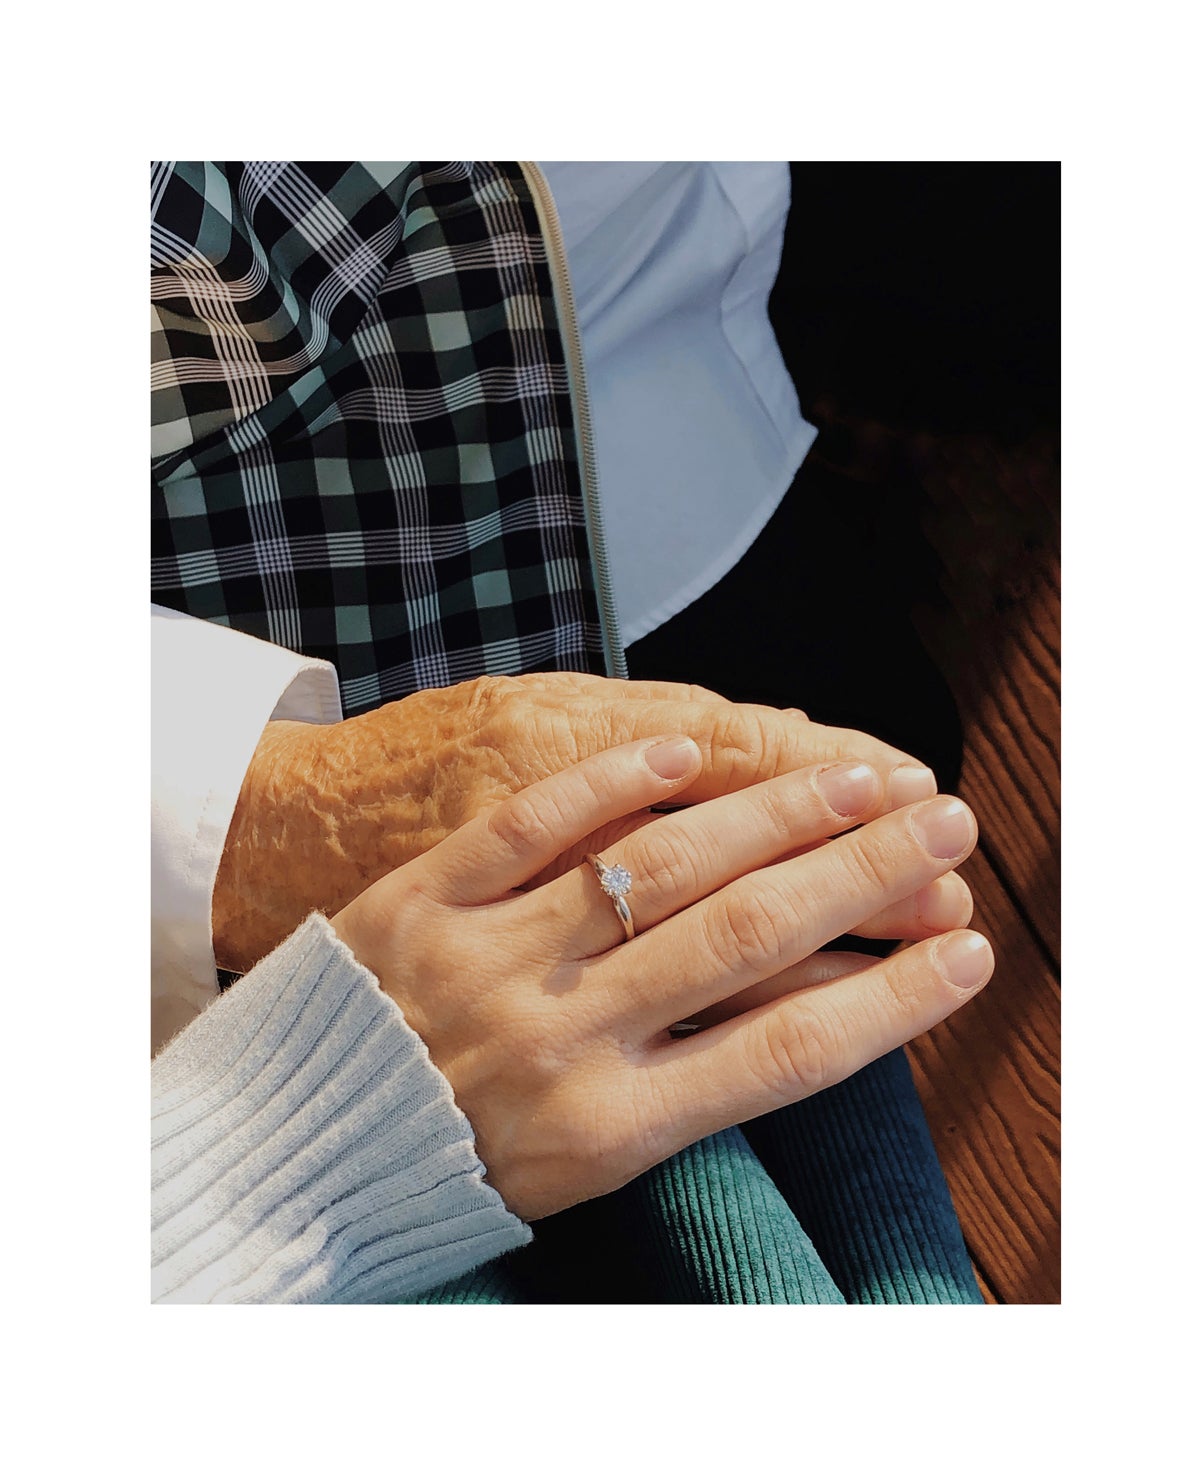 Photo by Molly Lopez of hand with ring resting on hand of parent